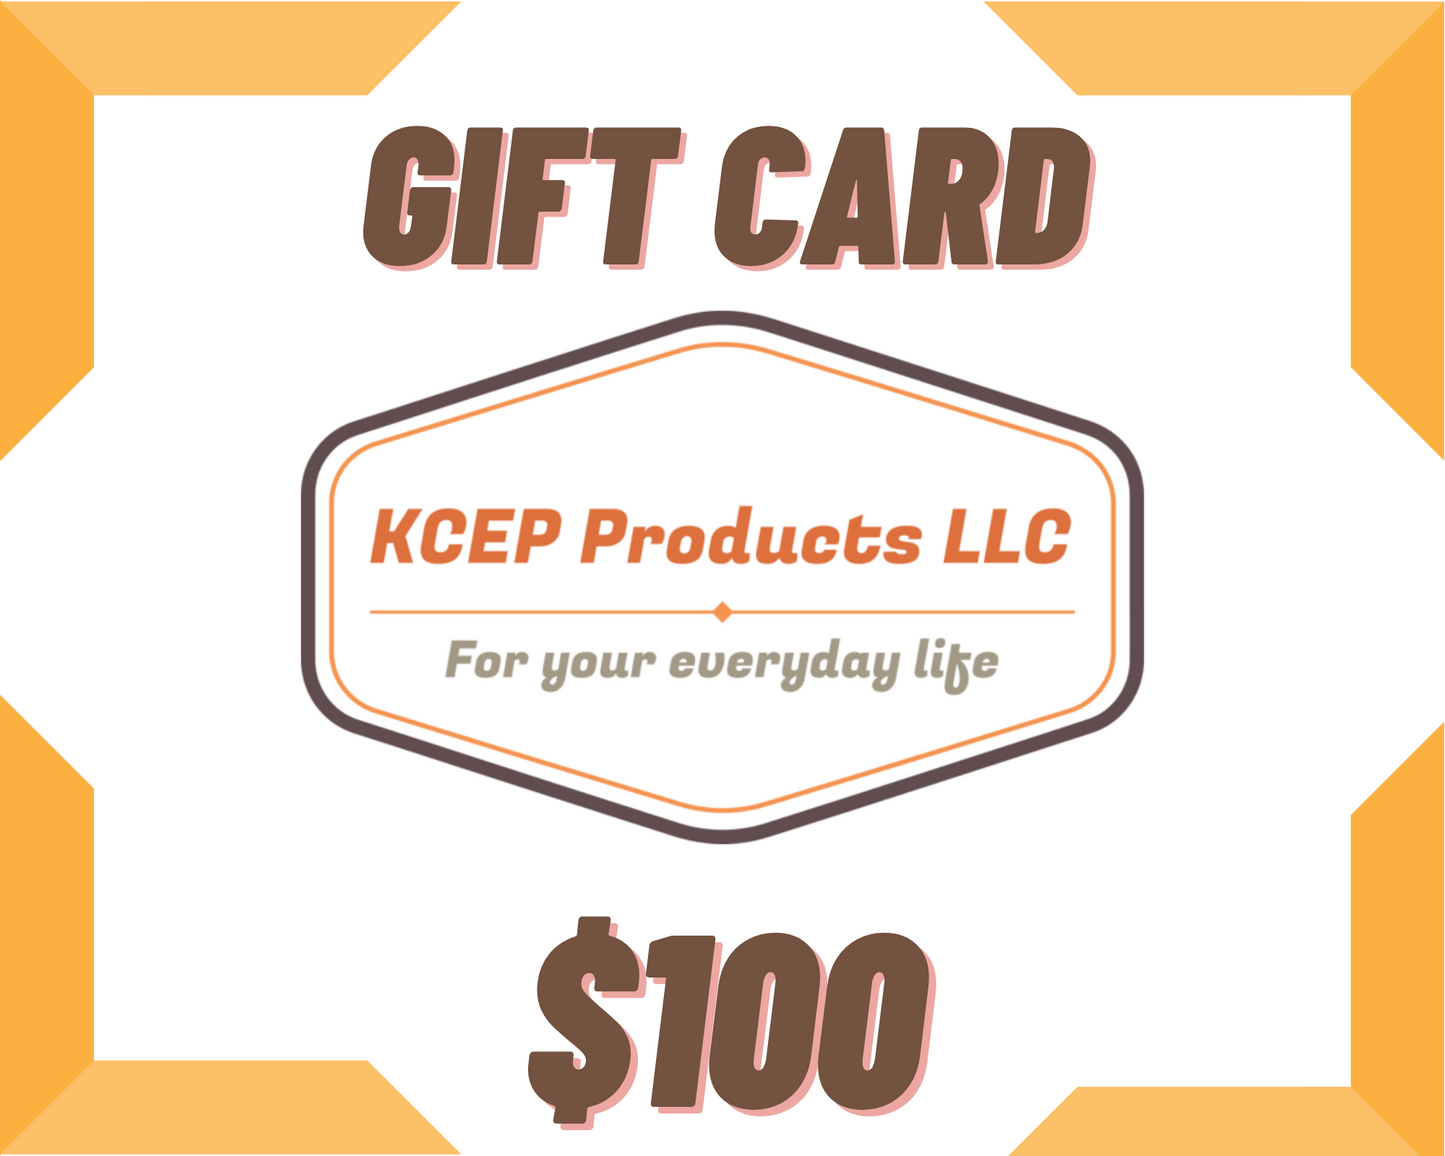 Gift Card for KCEP Products